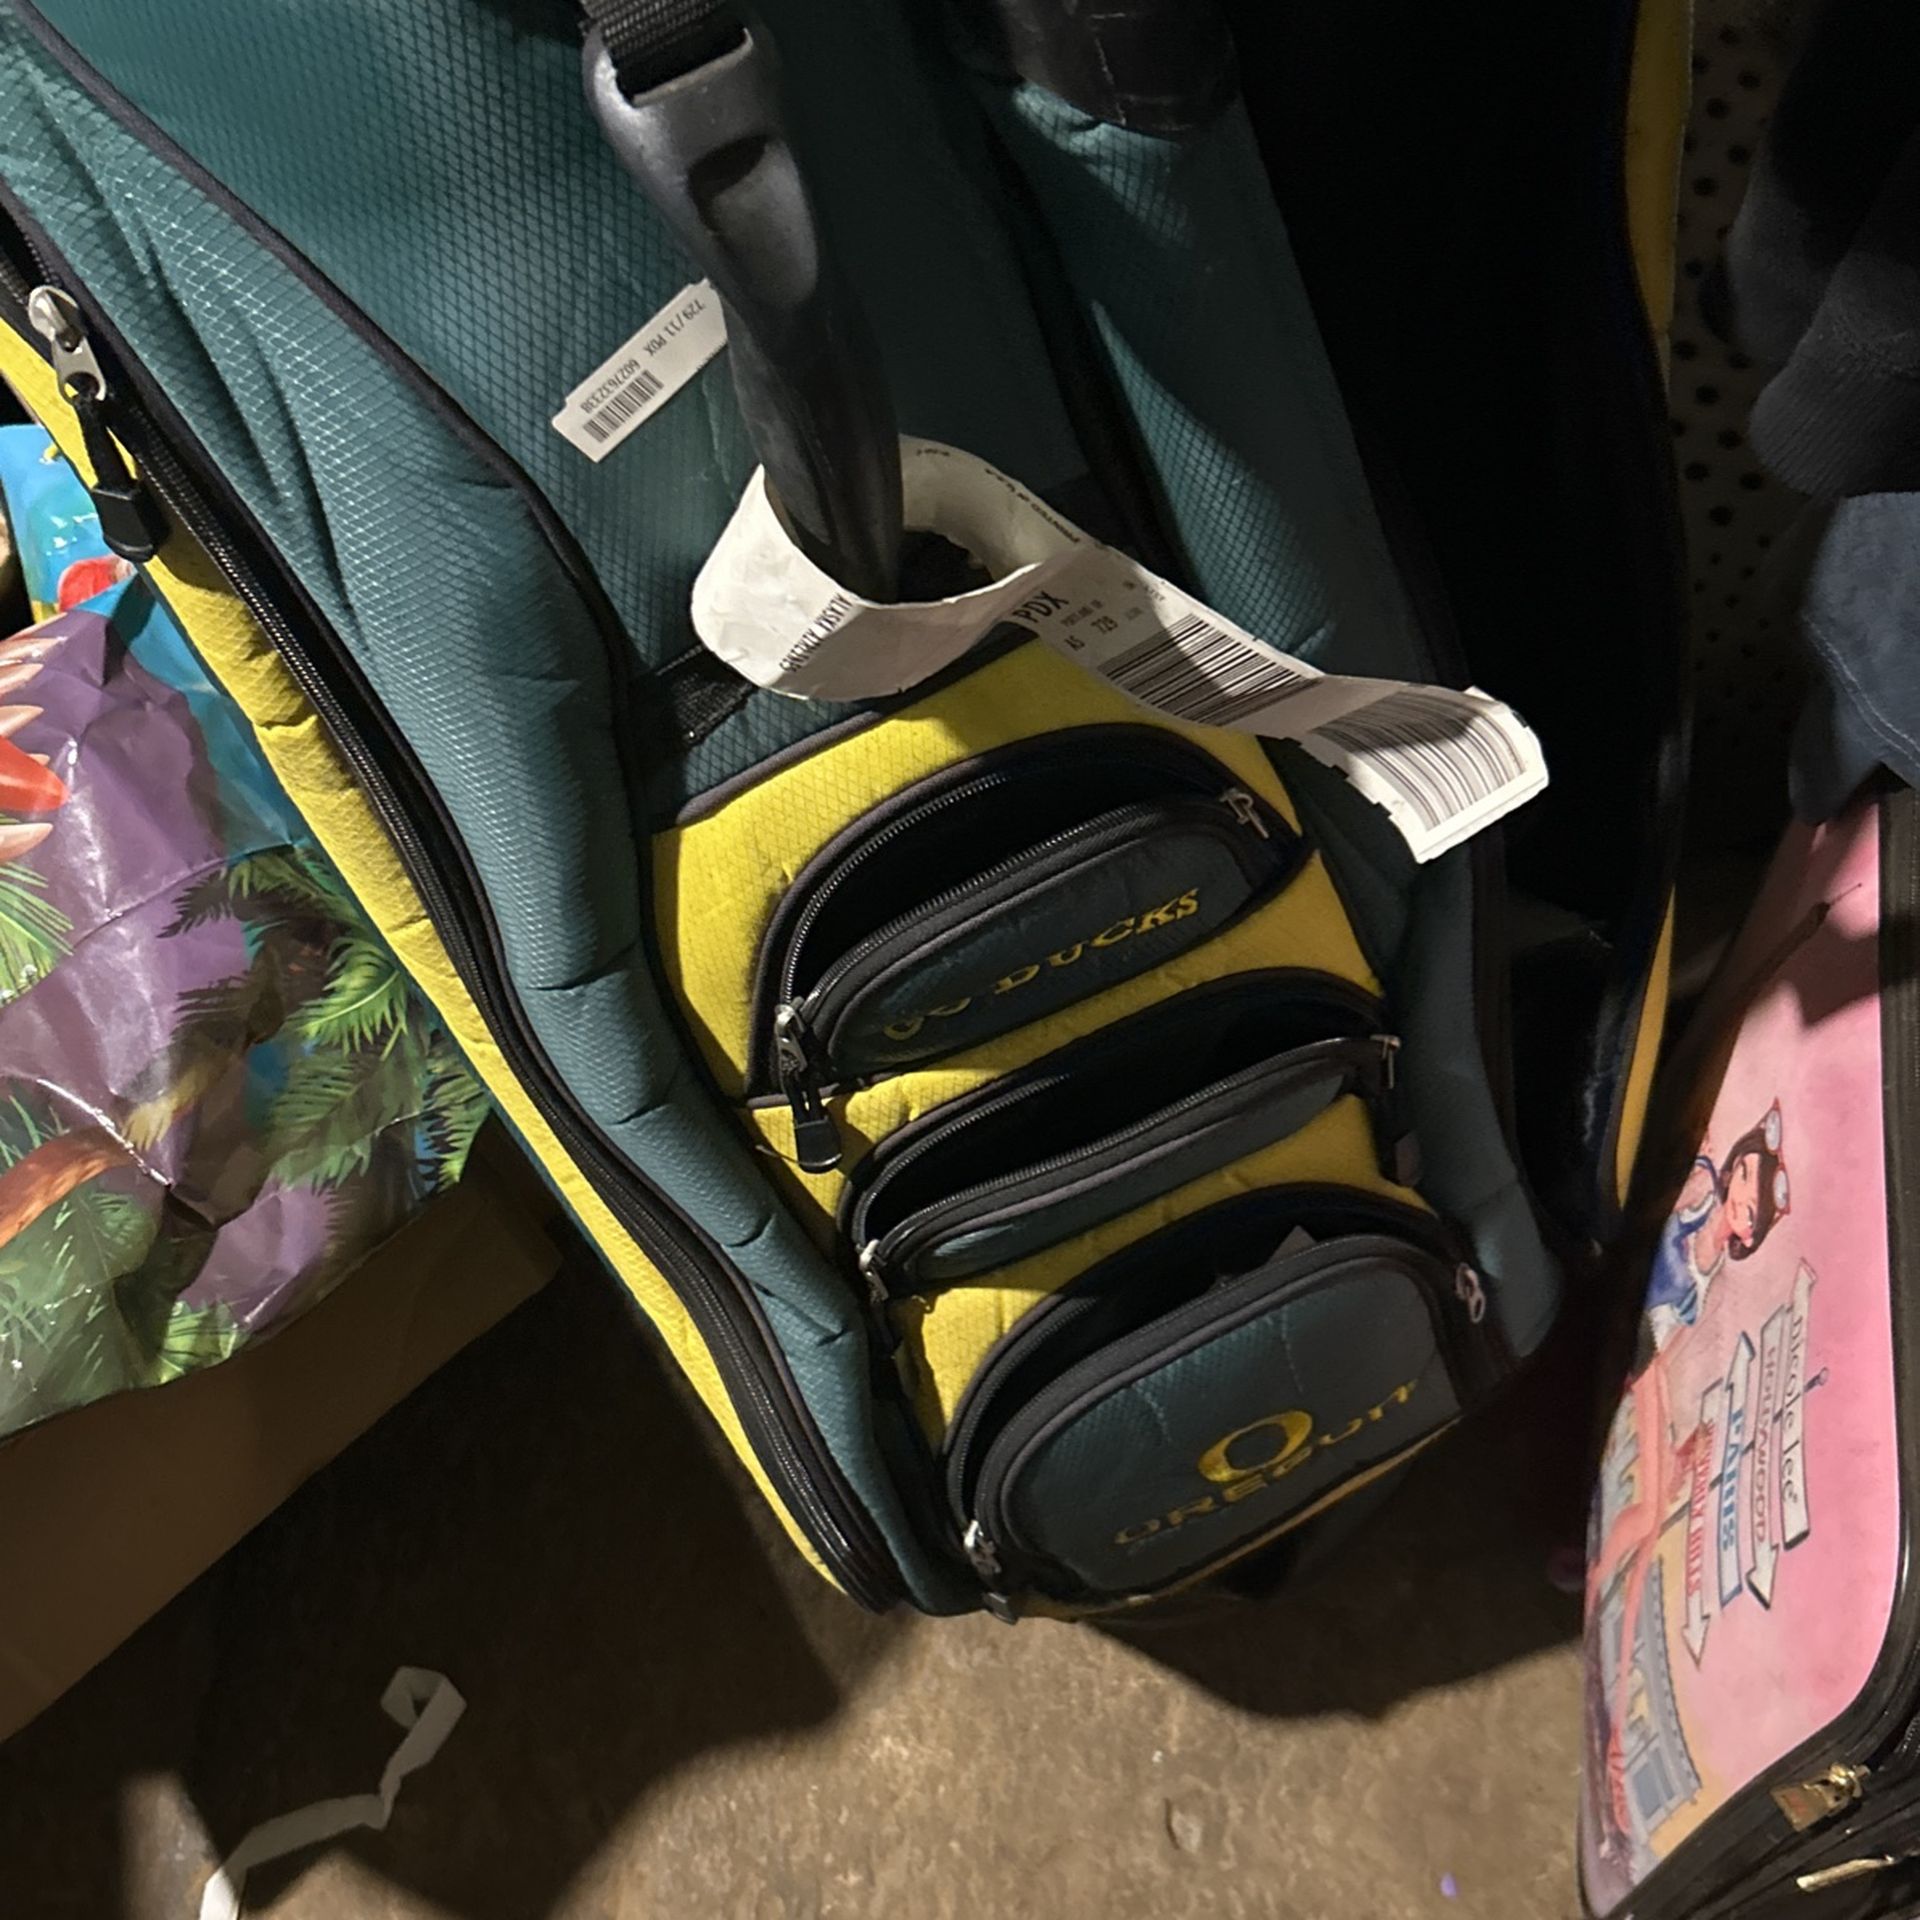 Golf Clubs / Bags Not Free